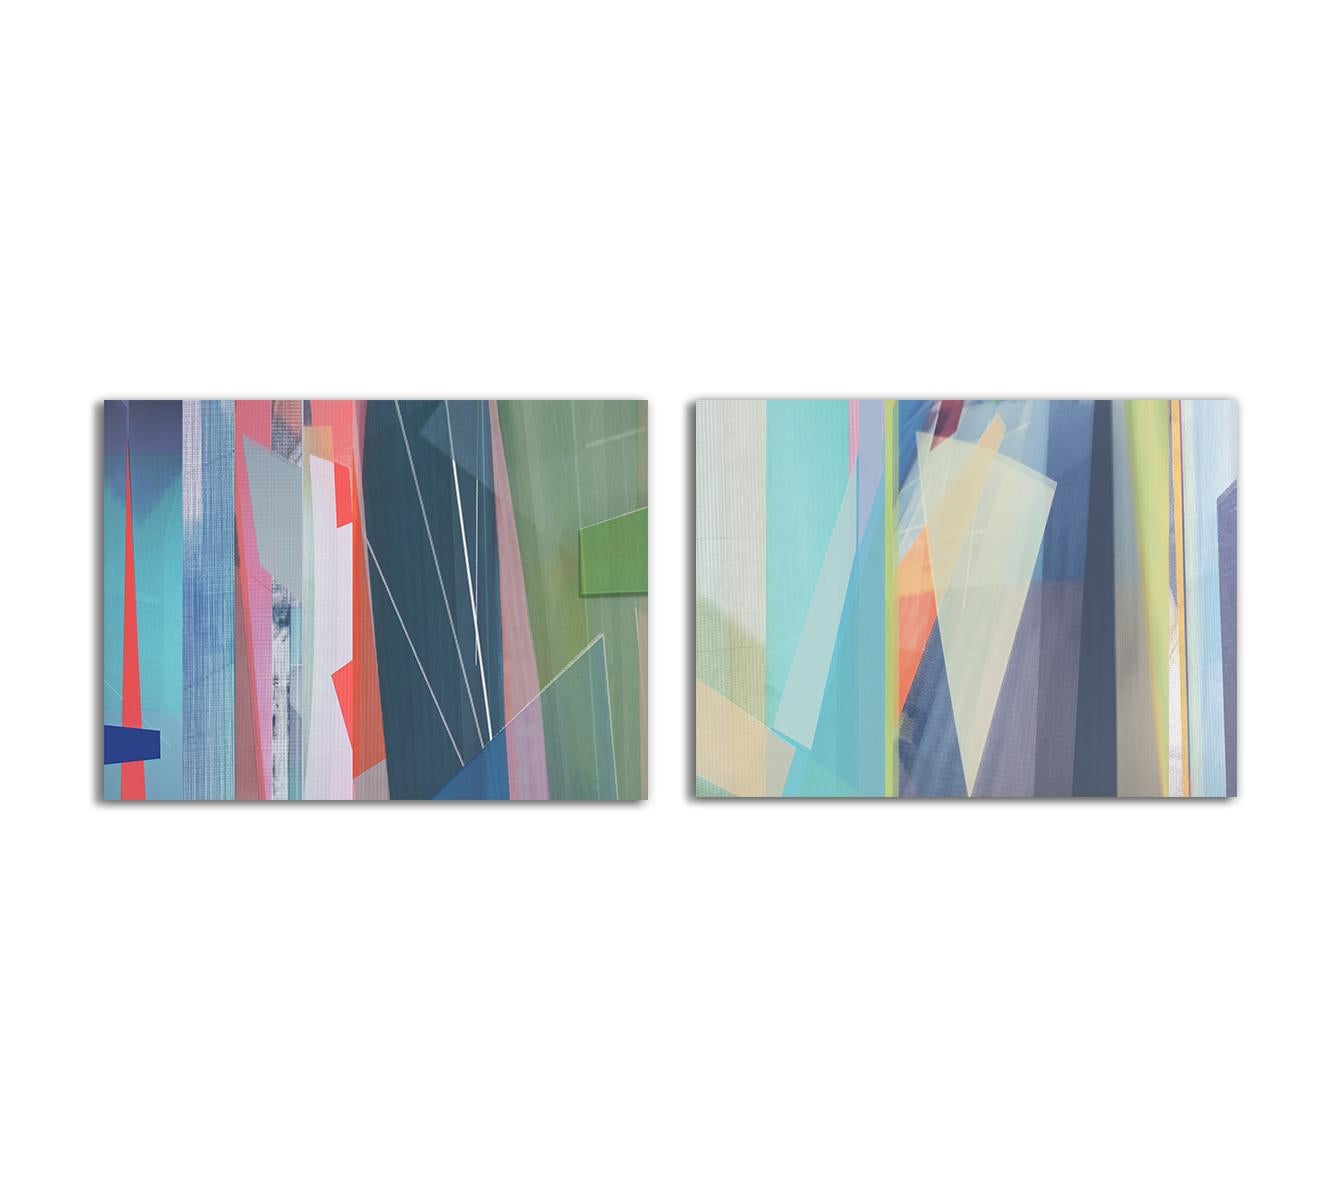 Monika Bravo Color Photograph - Parallel Fields #8 and #9. Abstract limited edition color photograph